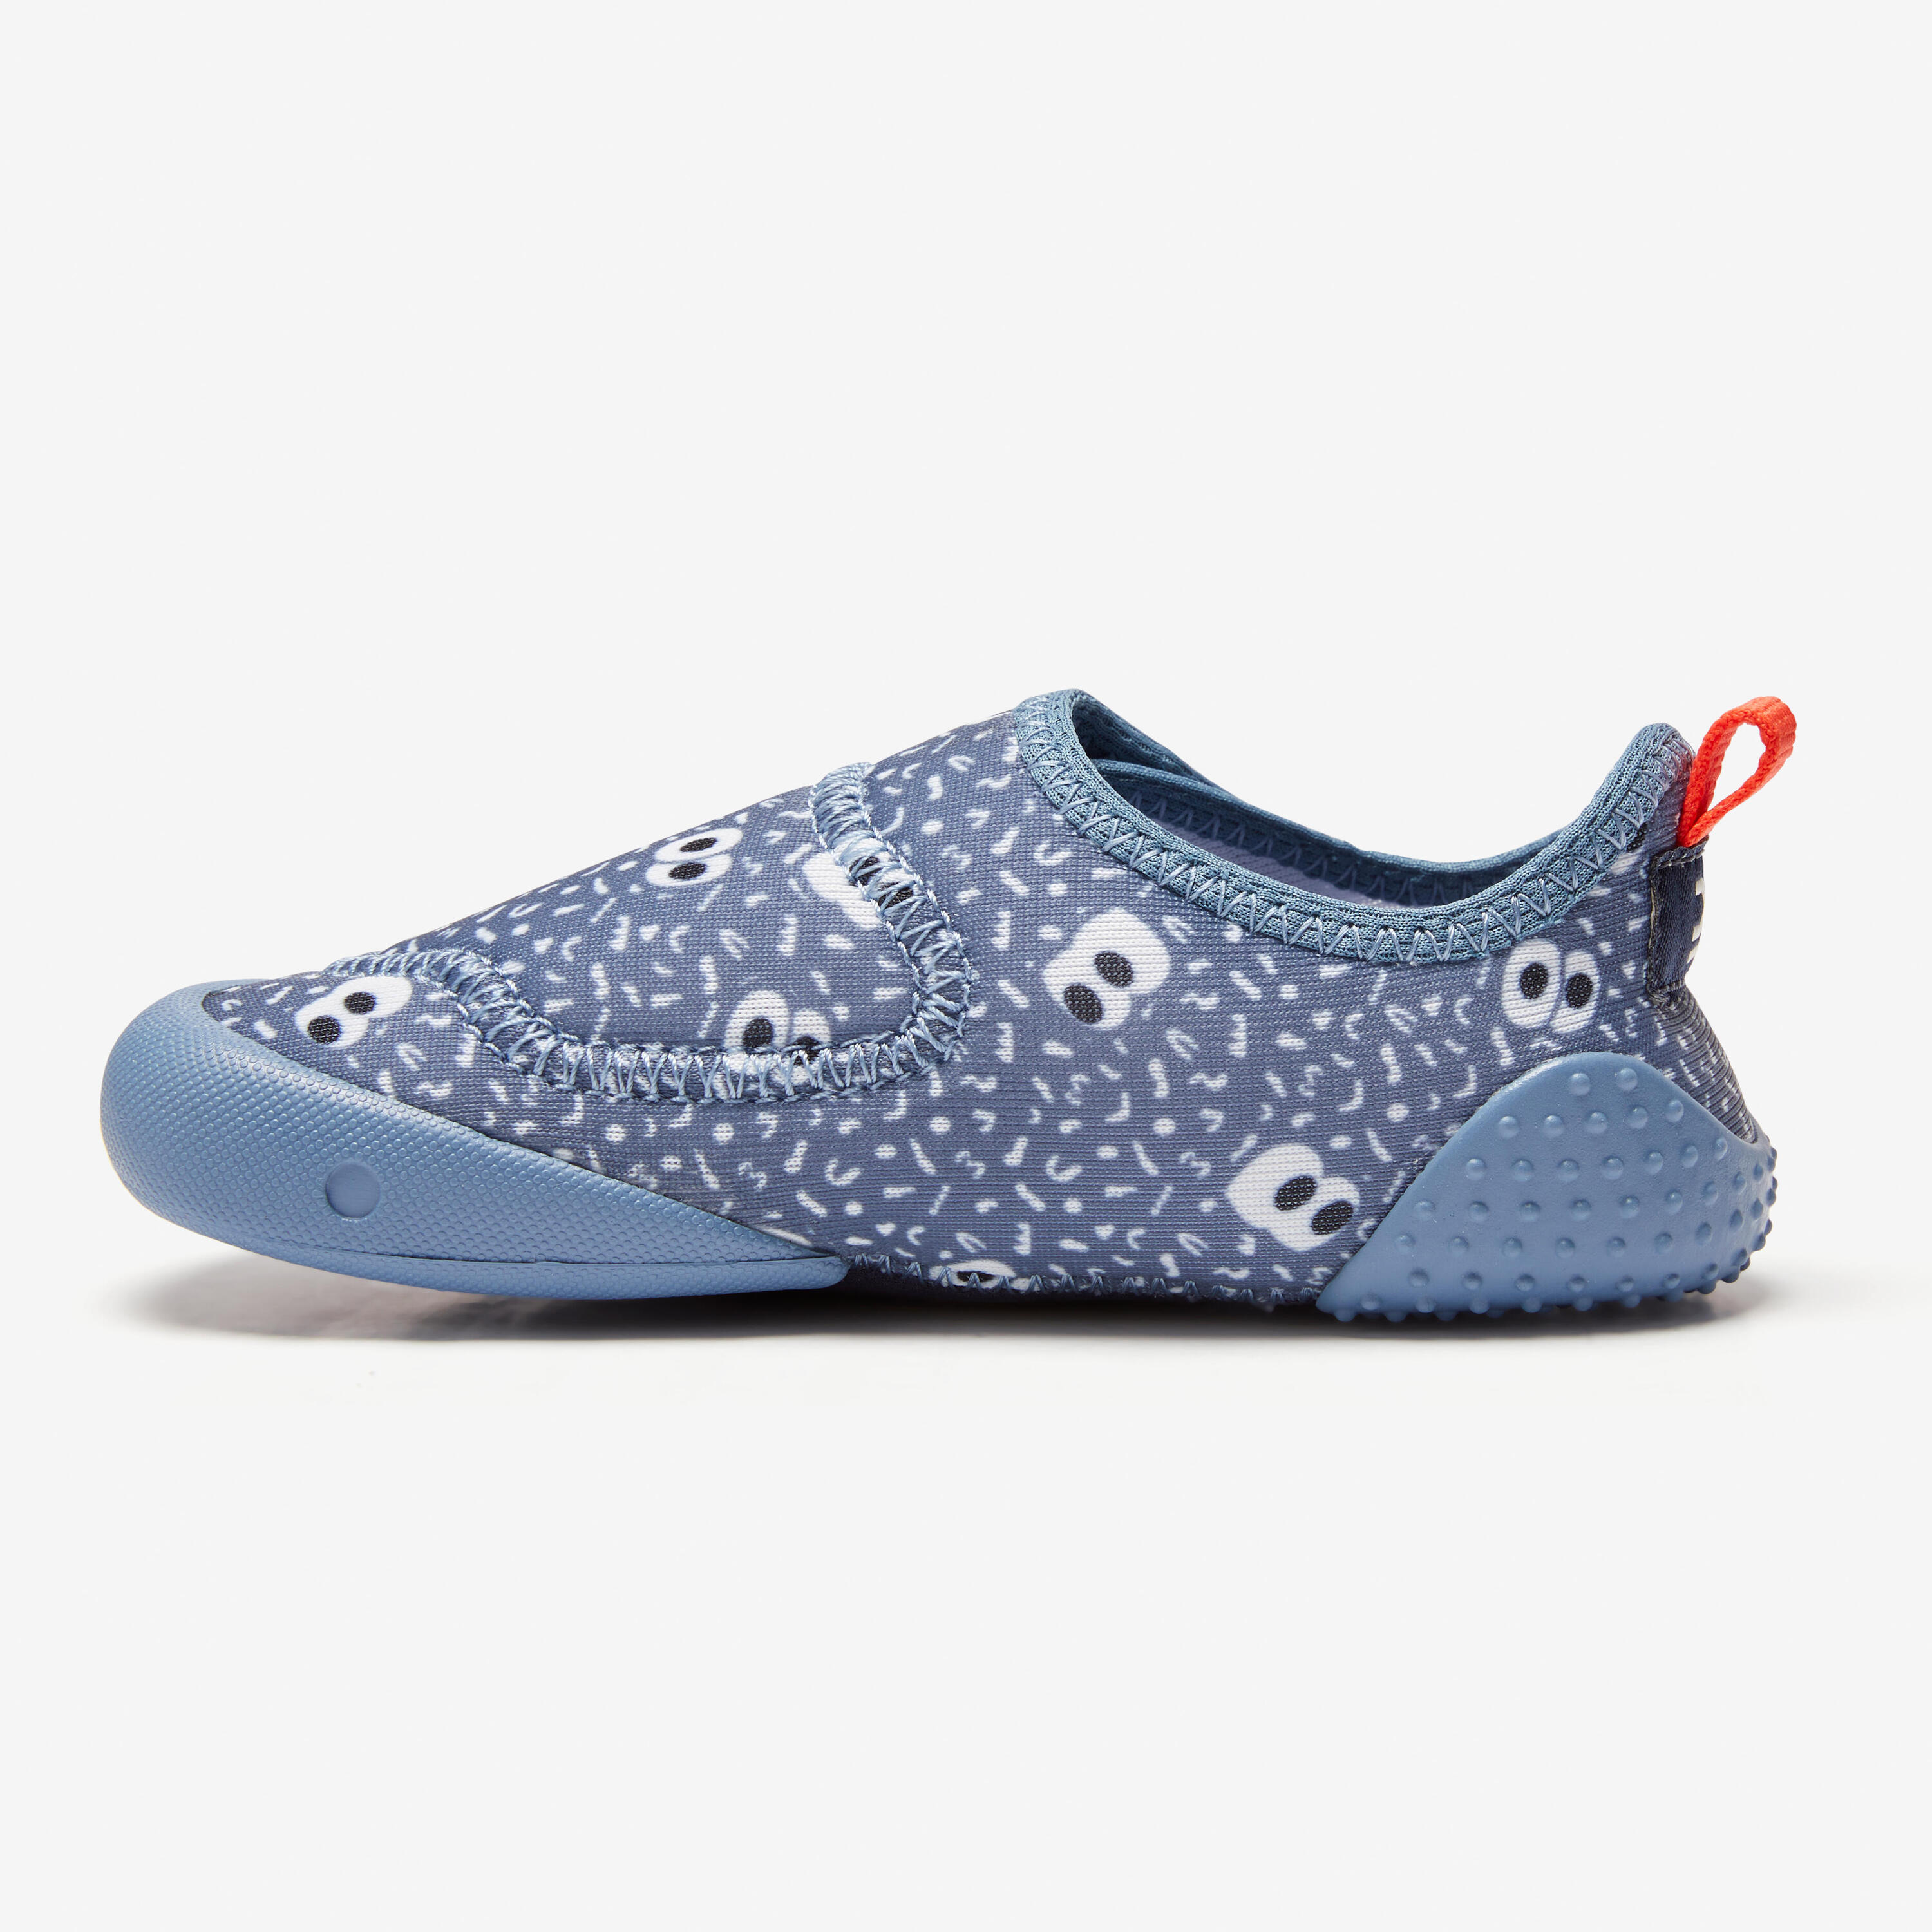 Kids' Non-Slip and Breathable Bootee - Patterns 1/8